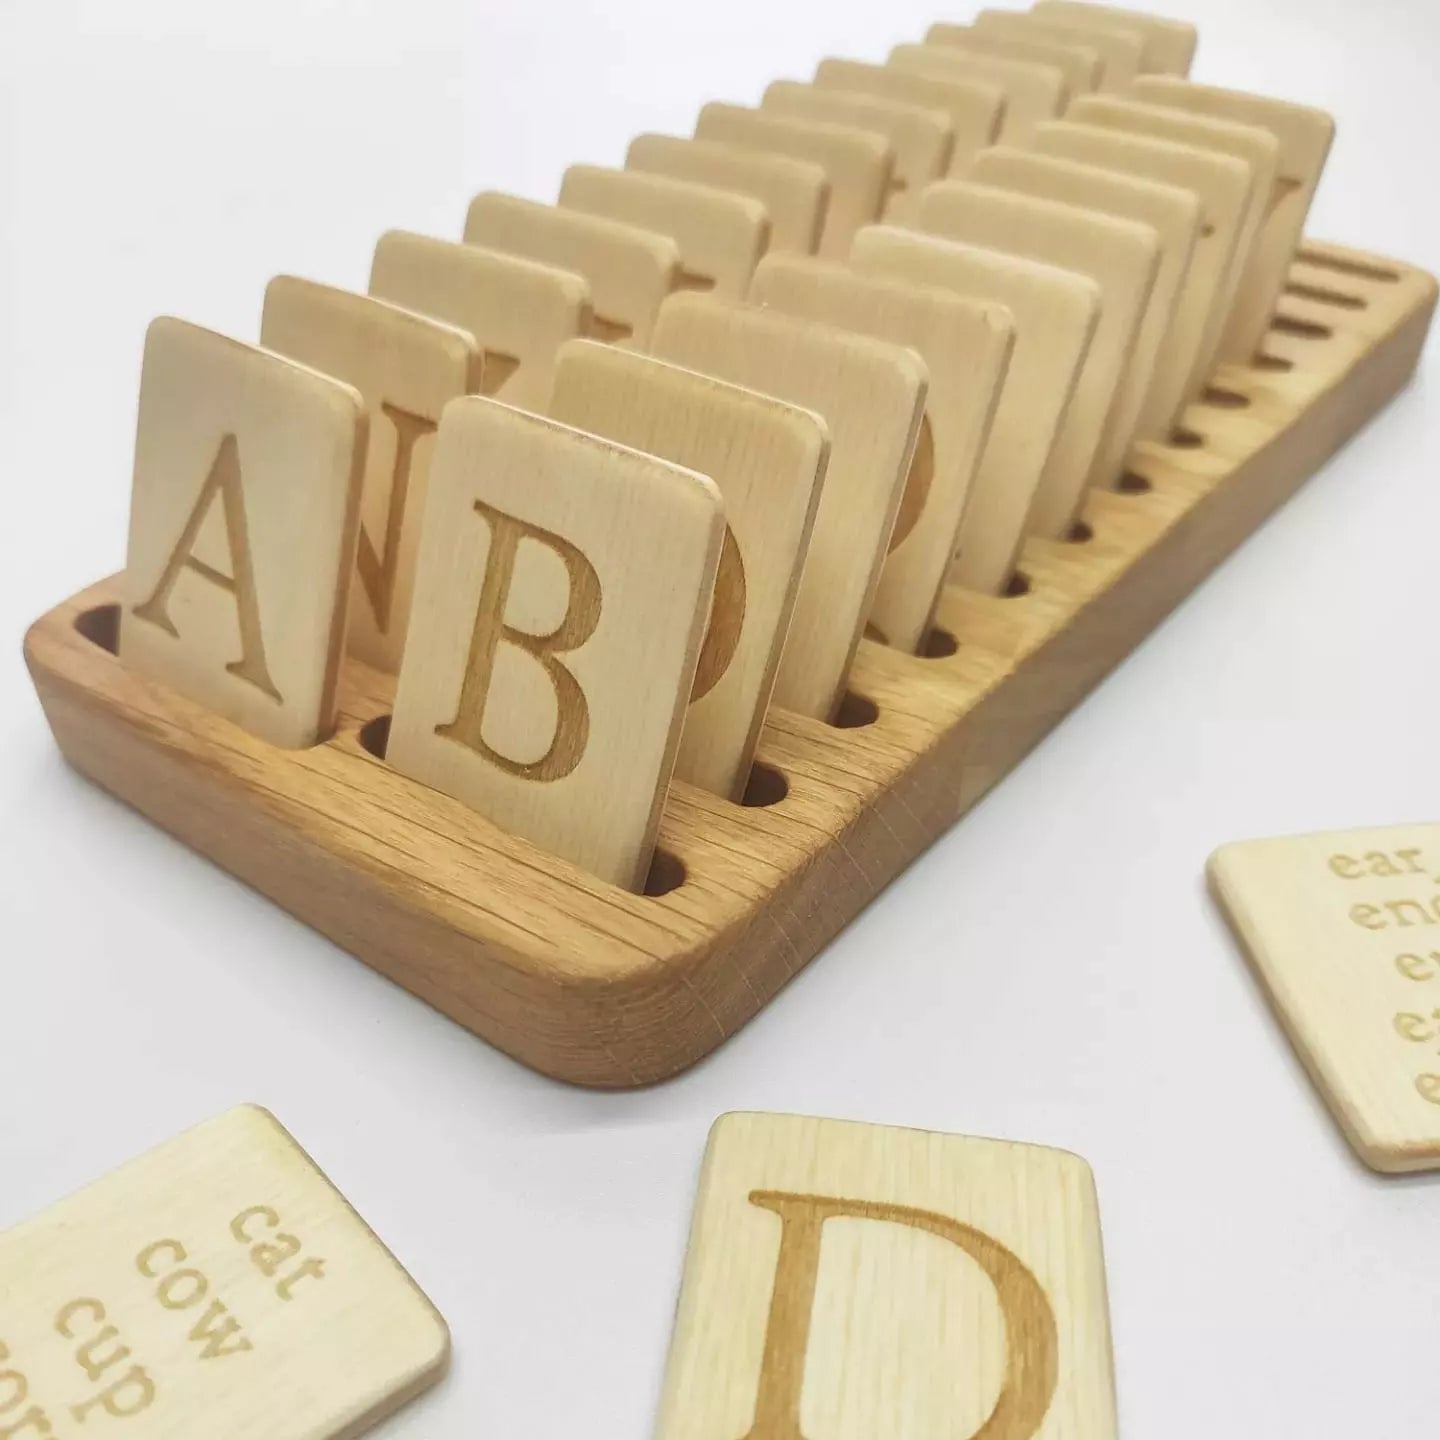 English big board and holder with letters cards